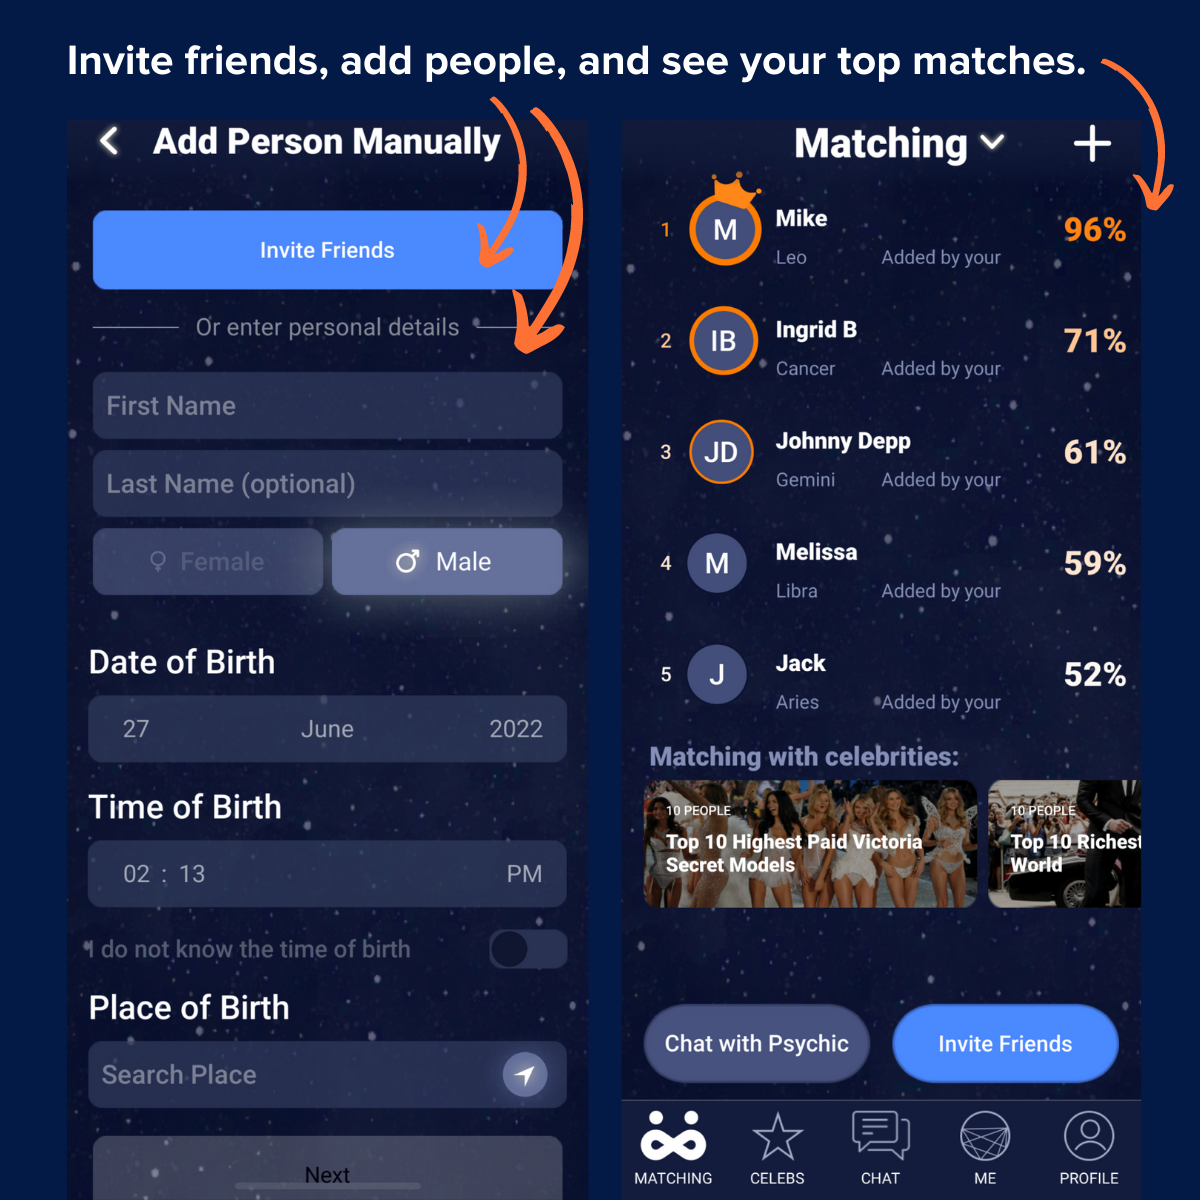 Invite friends, add people, and see your top matches.